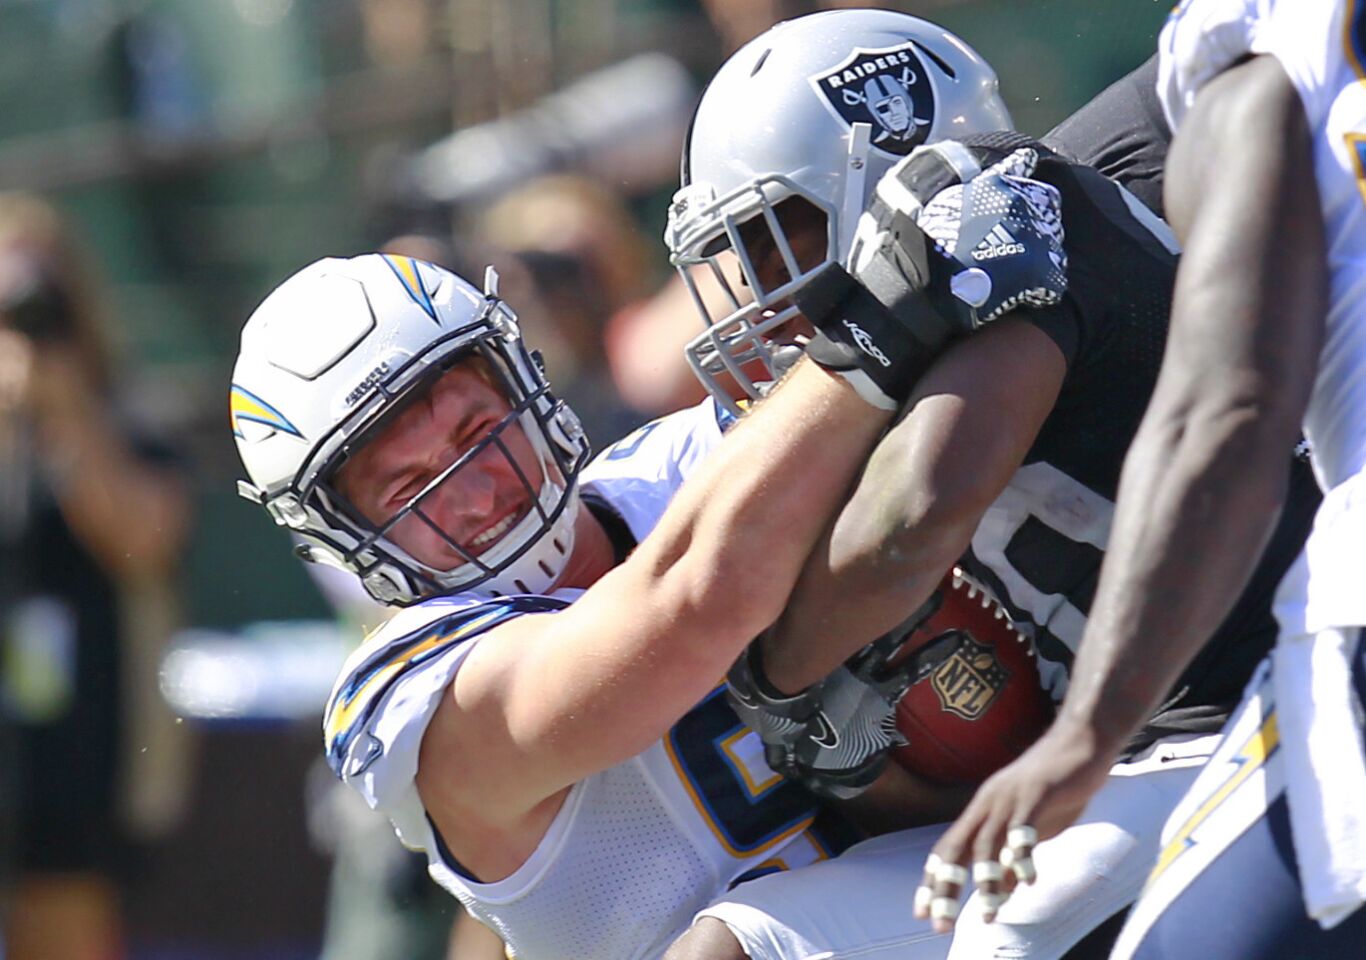 San Diego Chargers Joey Bosa stops Raiders Jalen Richard in the 2nd quarter in Oakland on Oct. 9, 2016. (Photo by K.C. Alfred/The San Diego Union-Tribune)